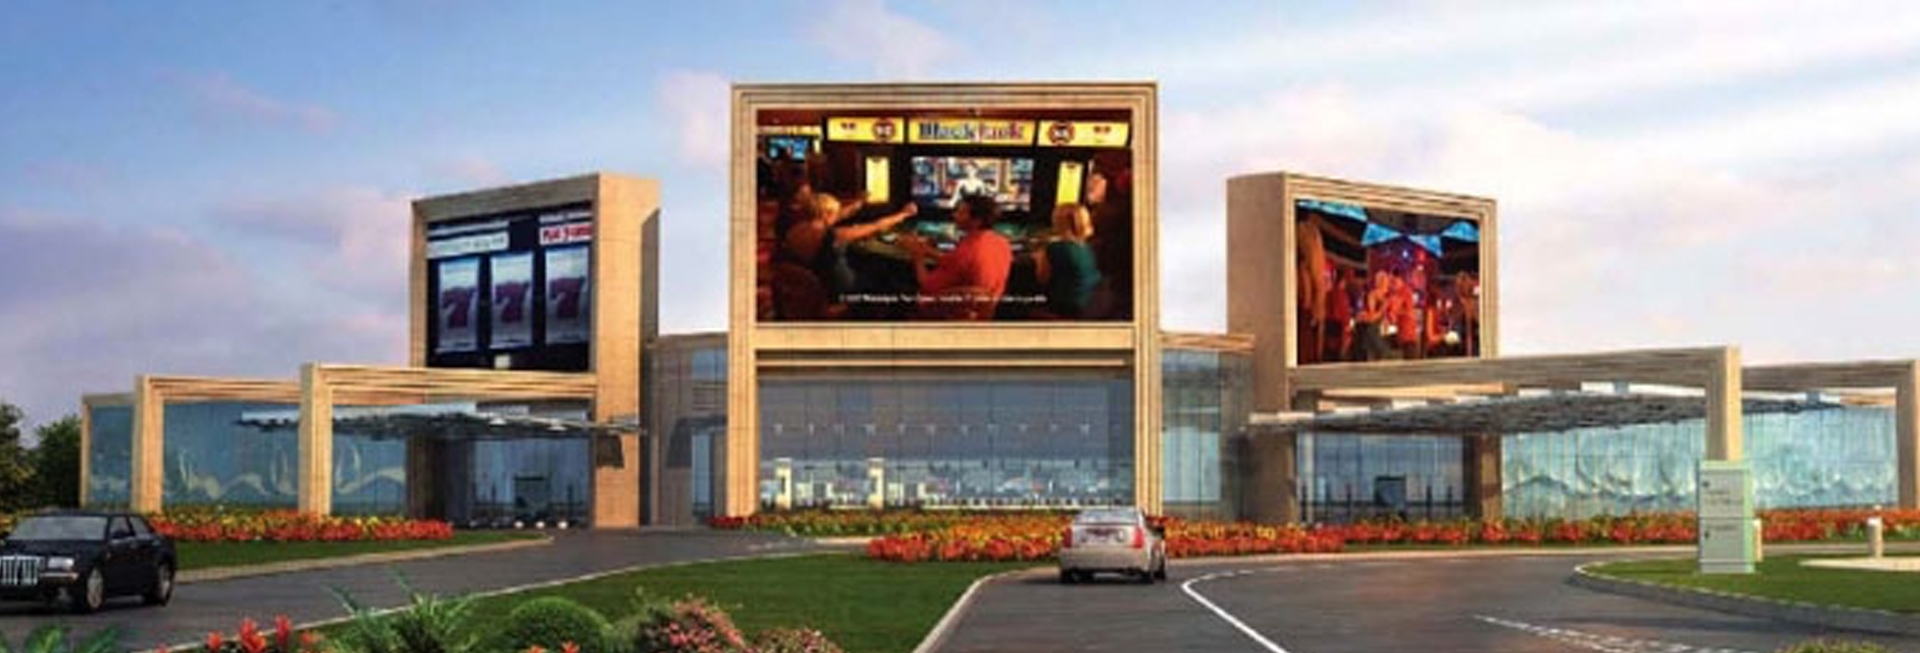 parx casino driving directions